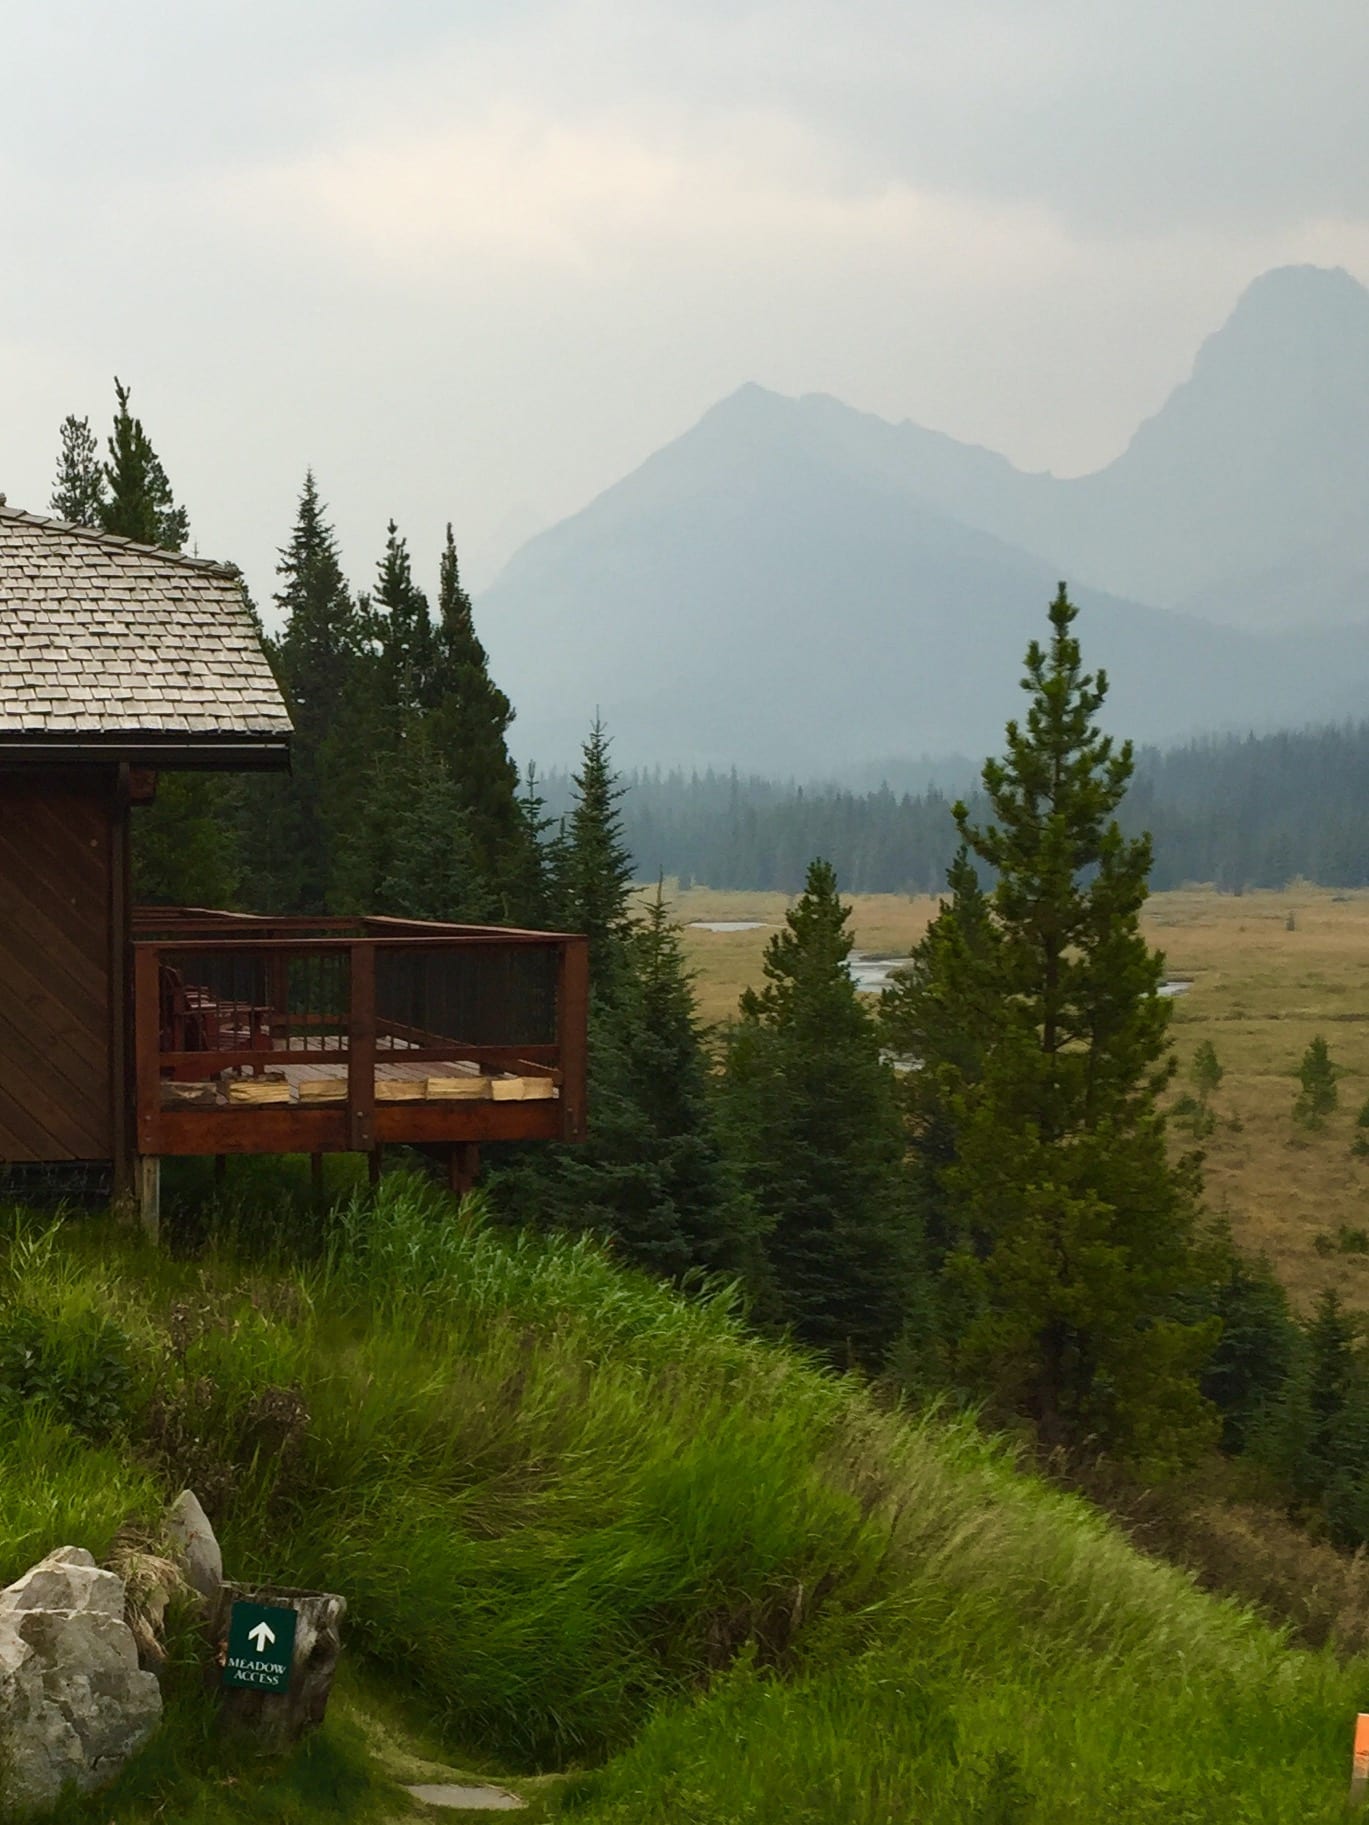 Mt. Engadine Lodge sits perched over a meadow. Watch closely, and you might spot a moose or two! 